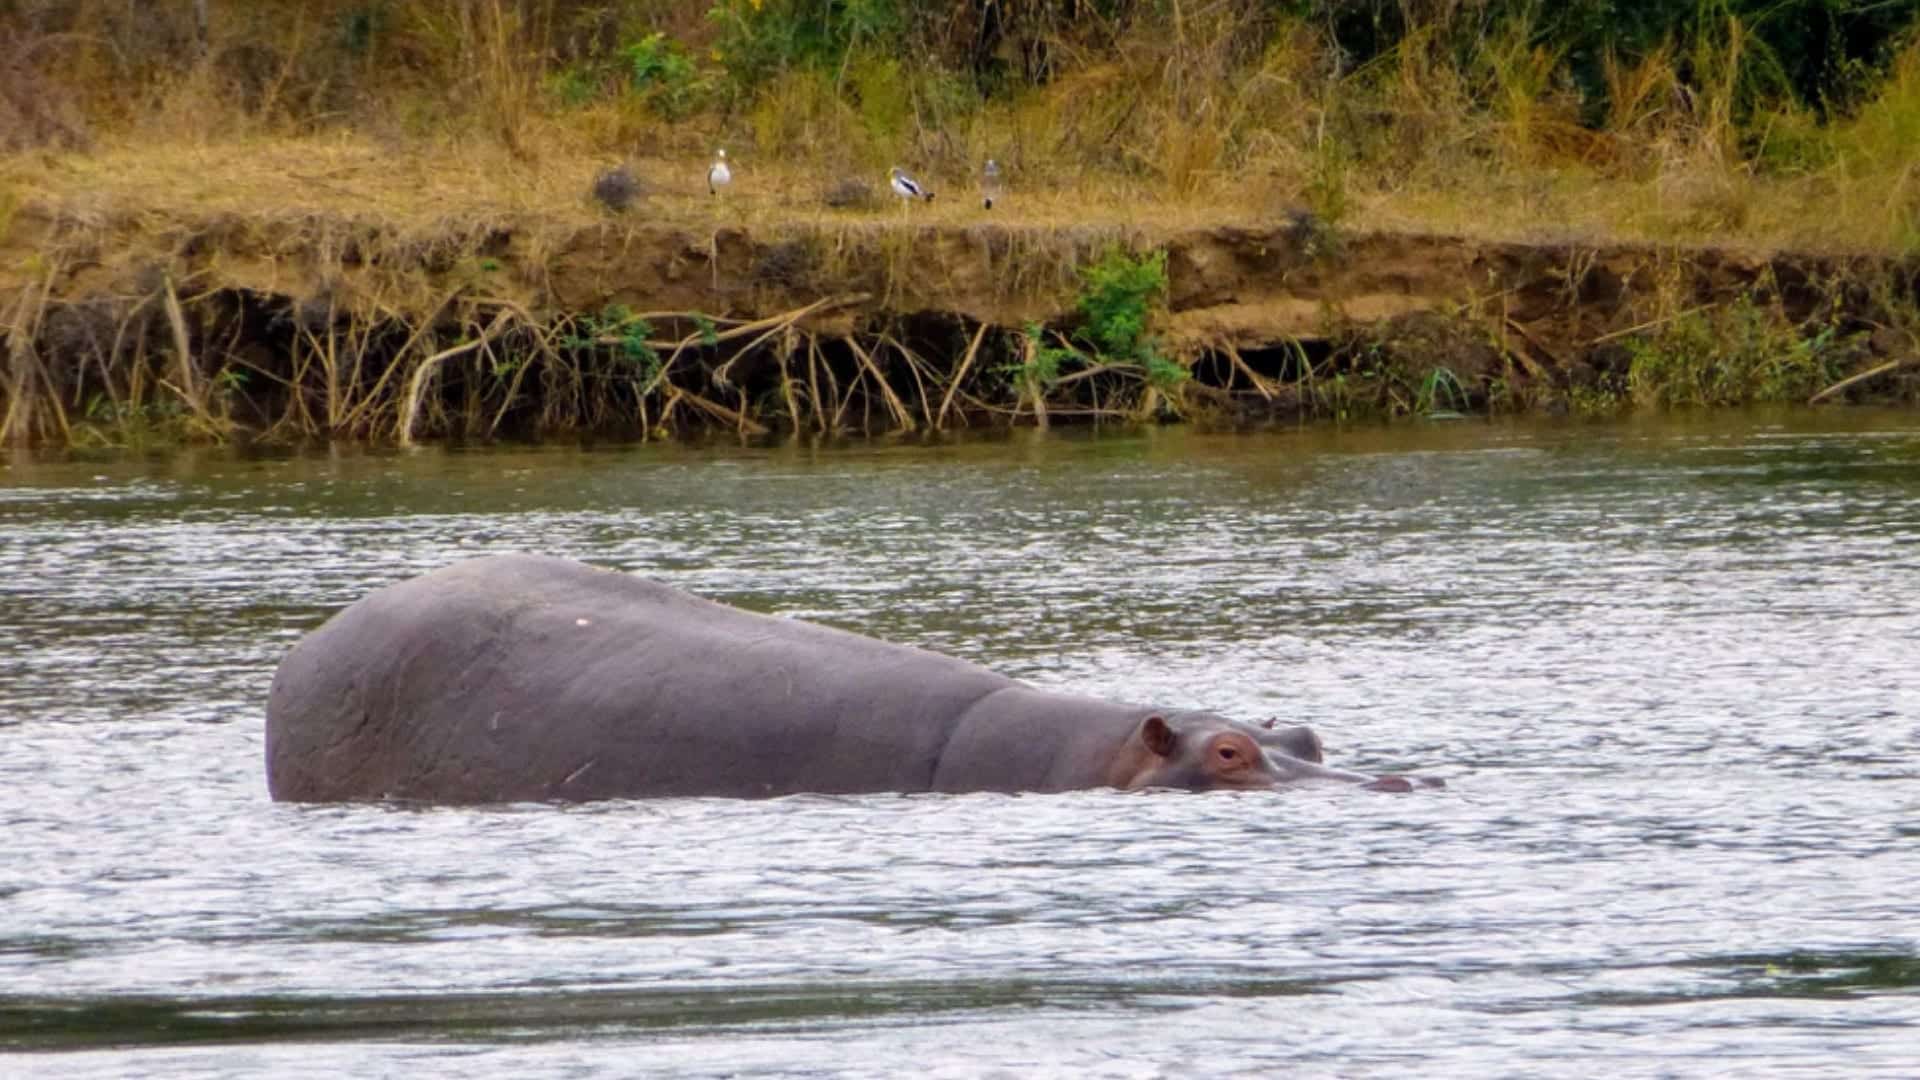 A Hippo in the river